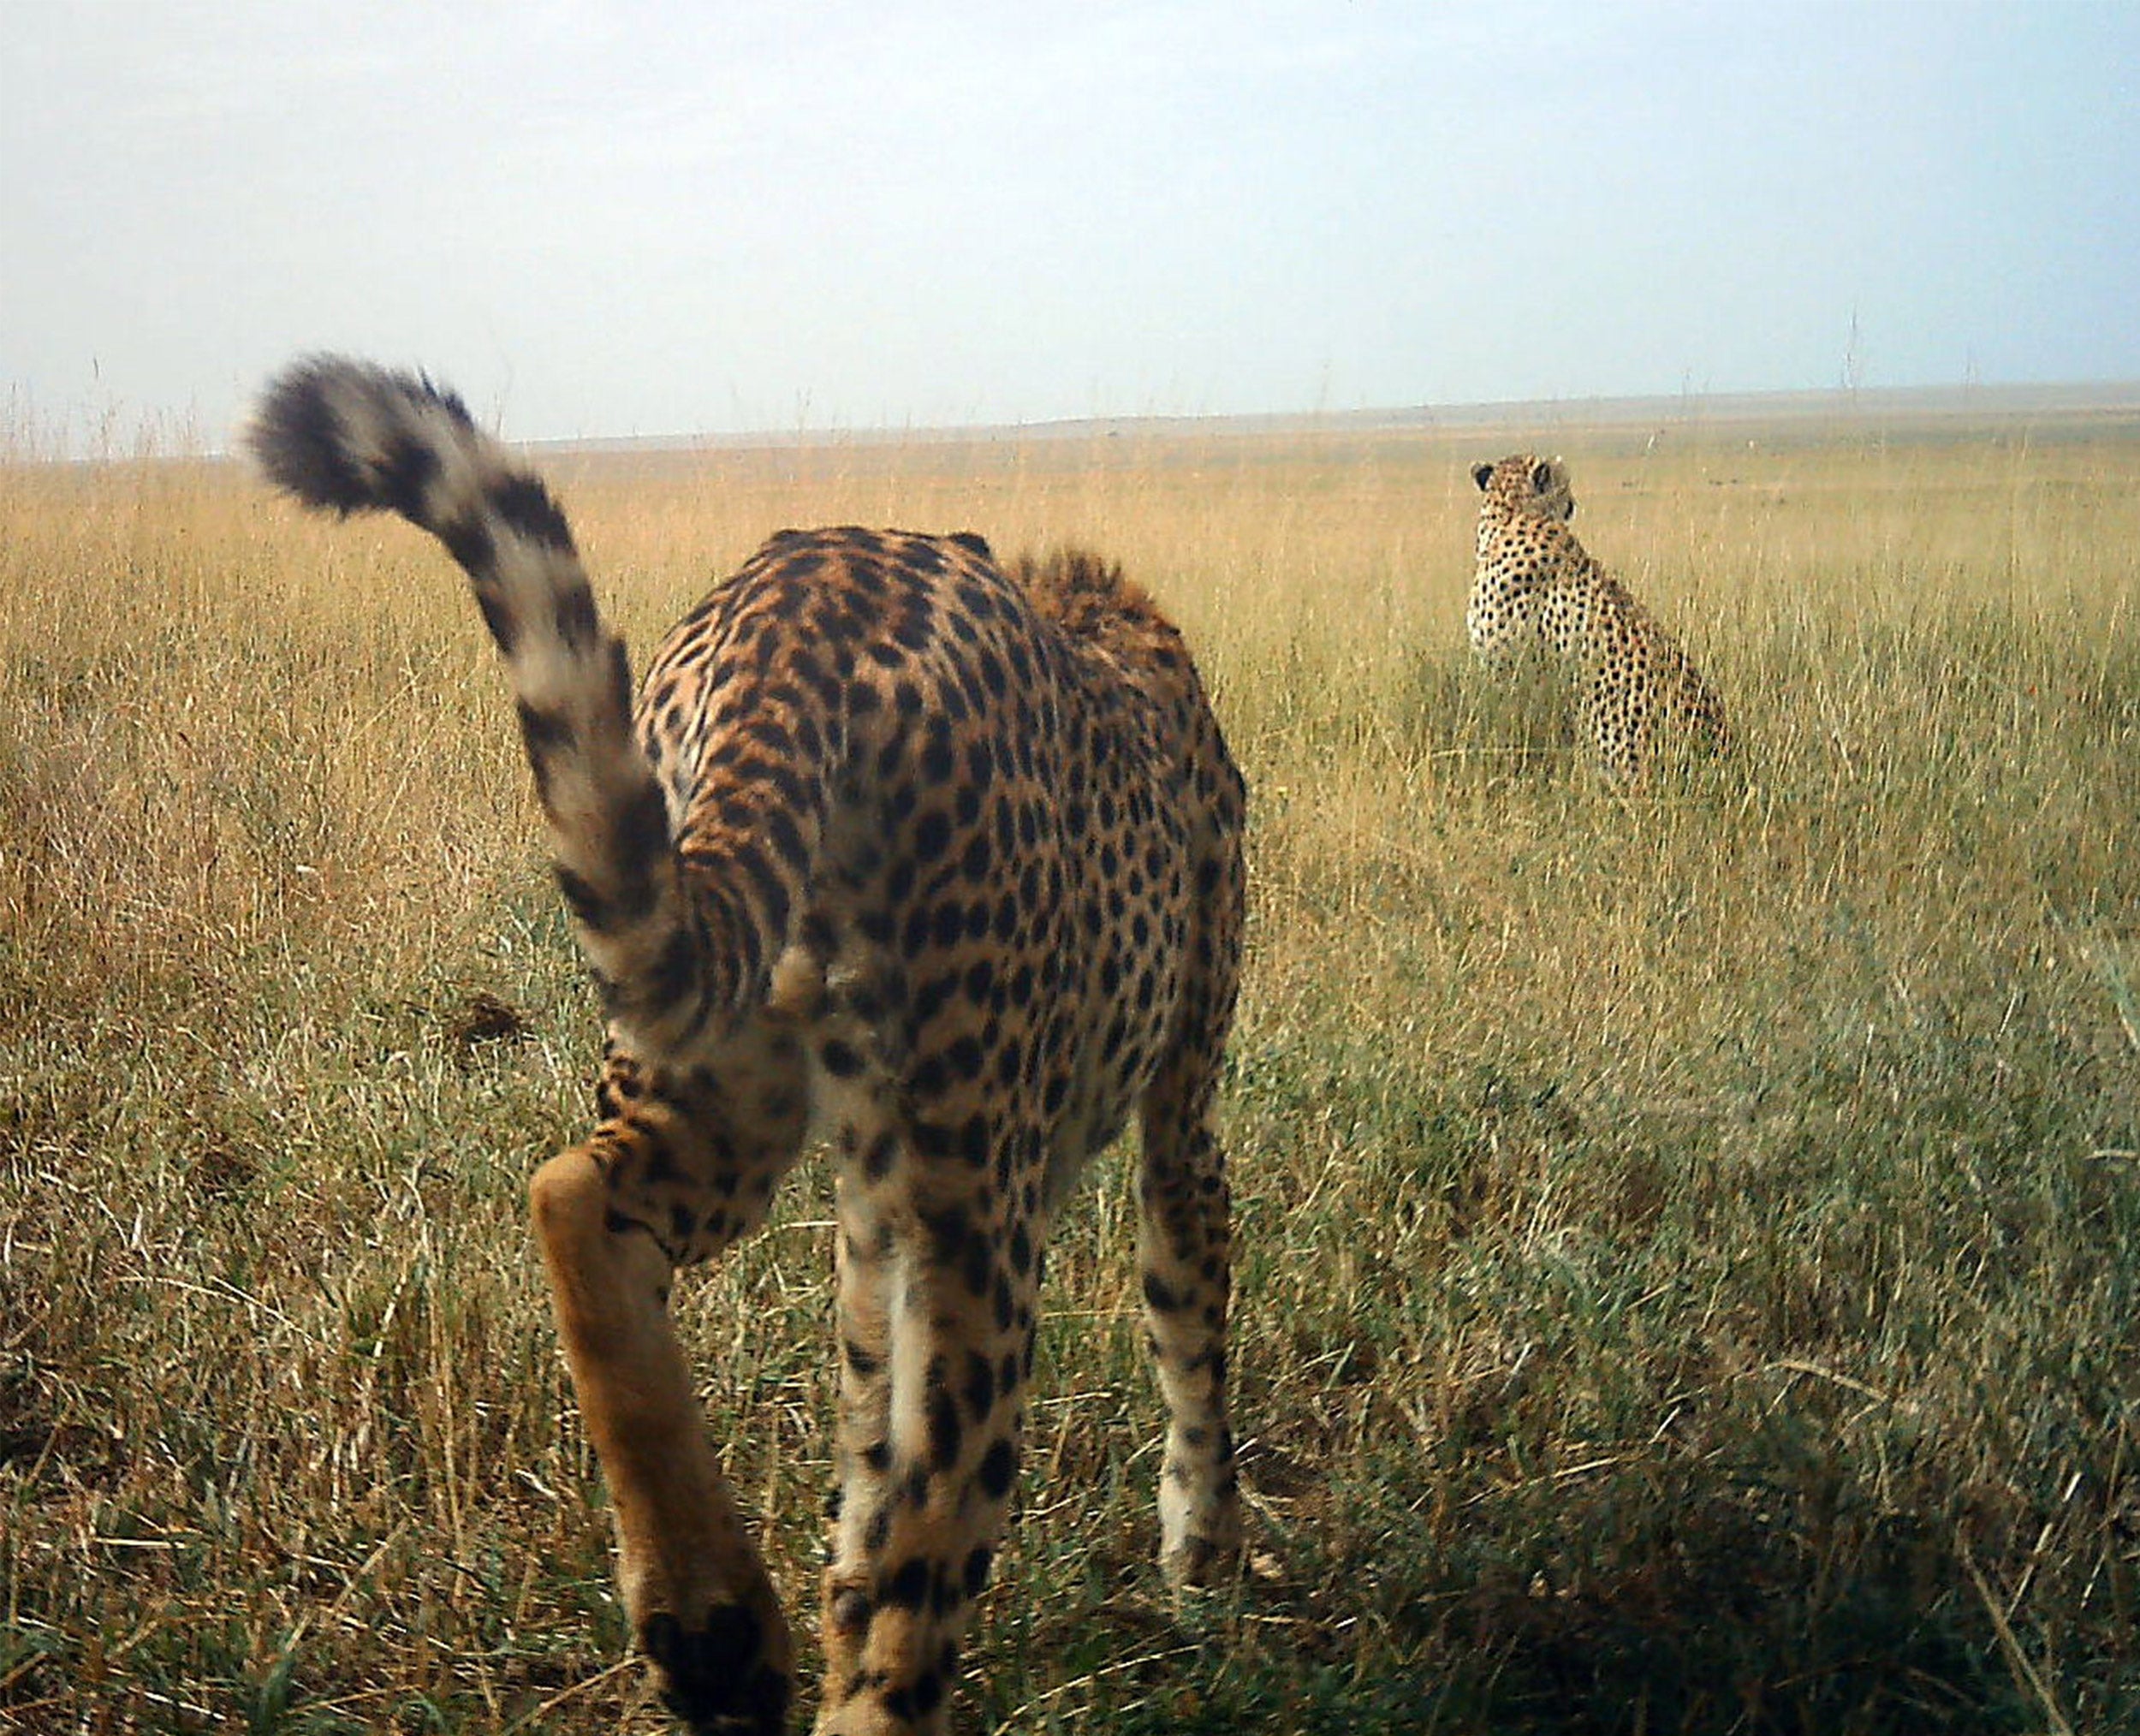 Two cheetahs in the wild.